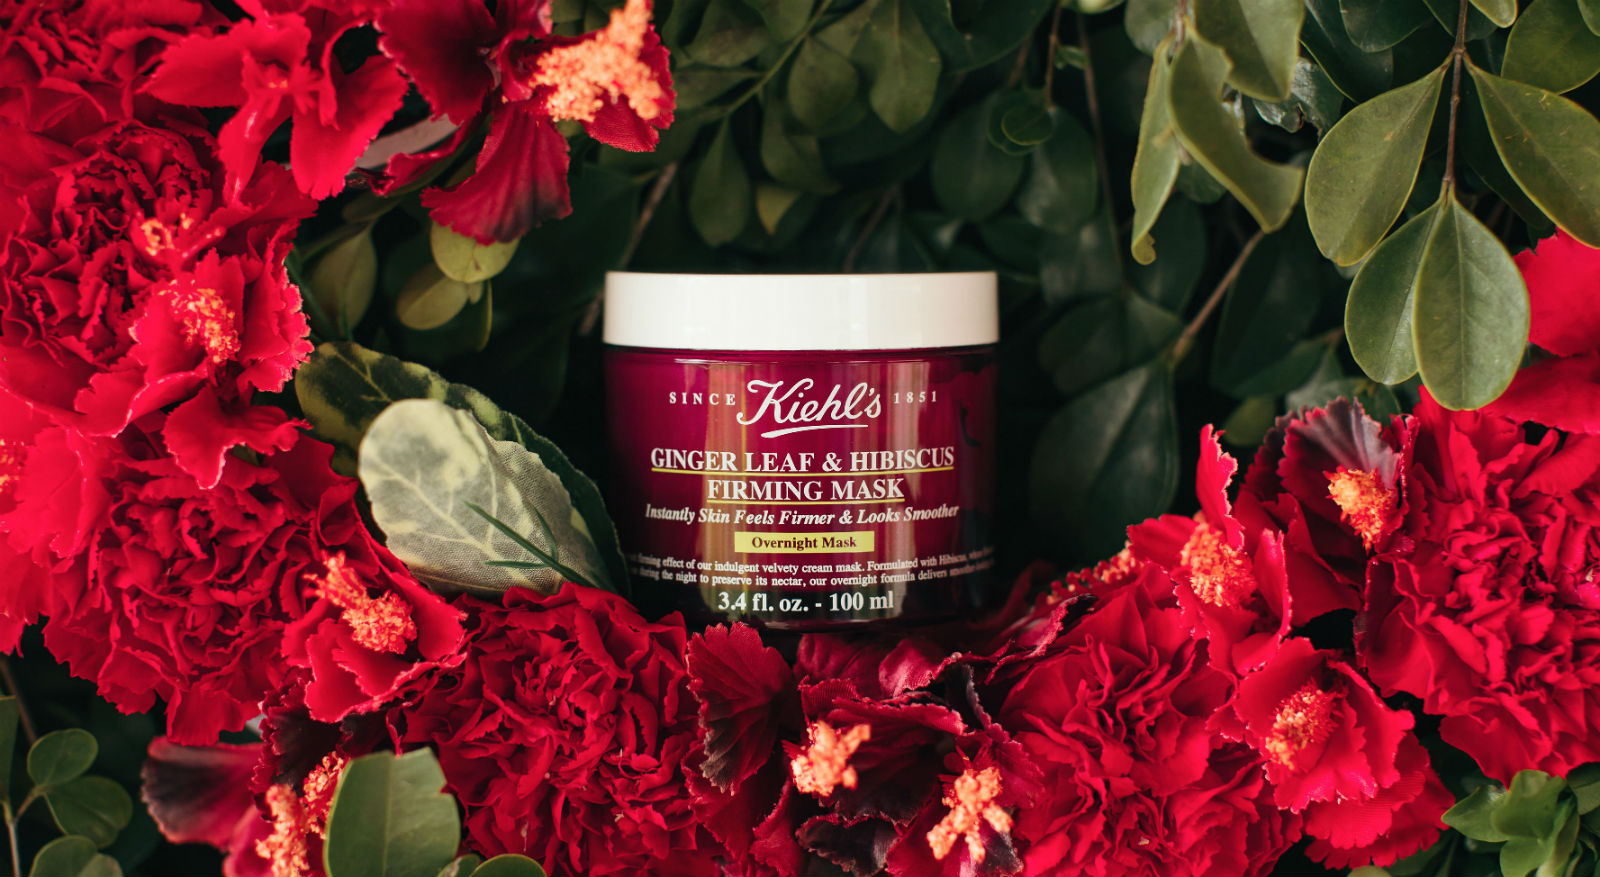 Accord Deltage befolkning Lights off, Mask on: A night of indulgence with the new Kiehl's Ginger Leaf  and Hibiscus Mask - Style Vanity